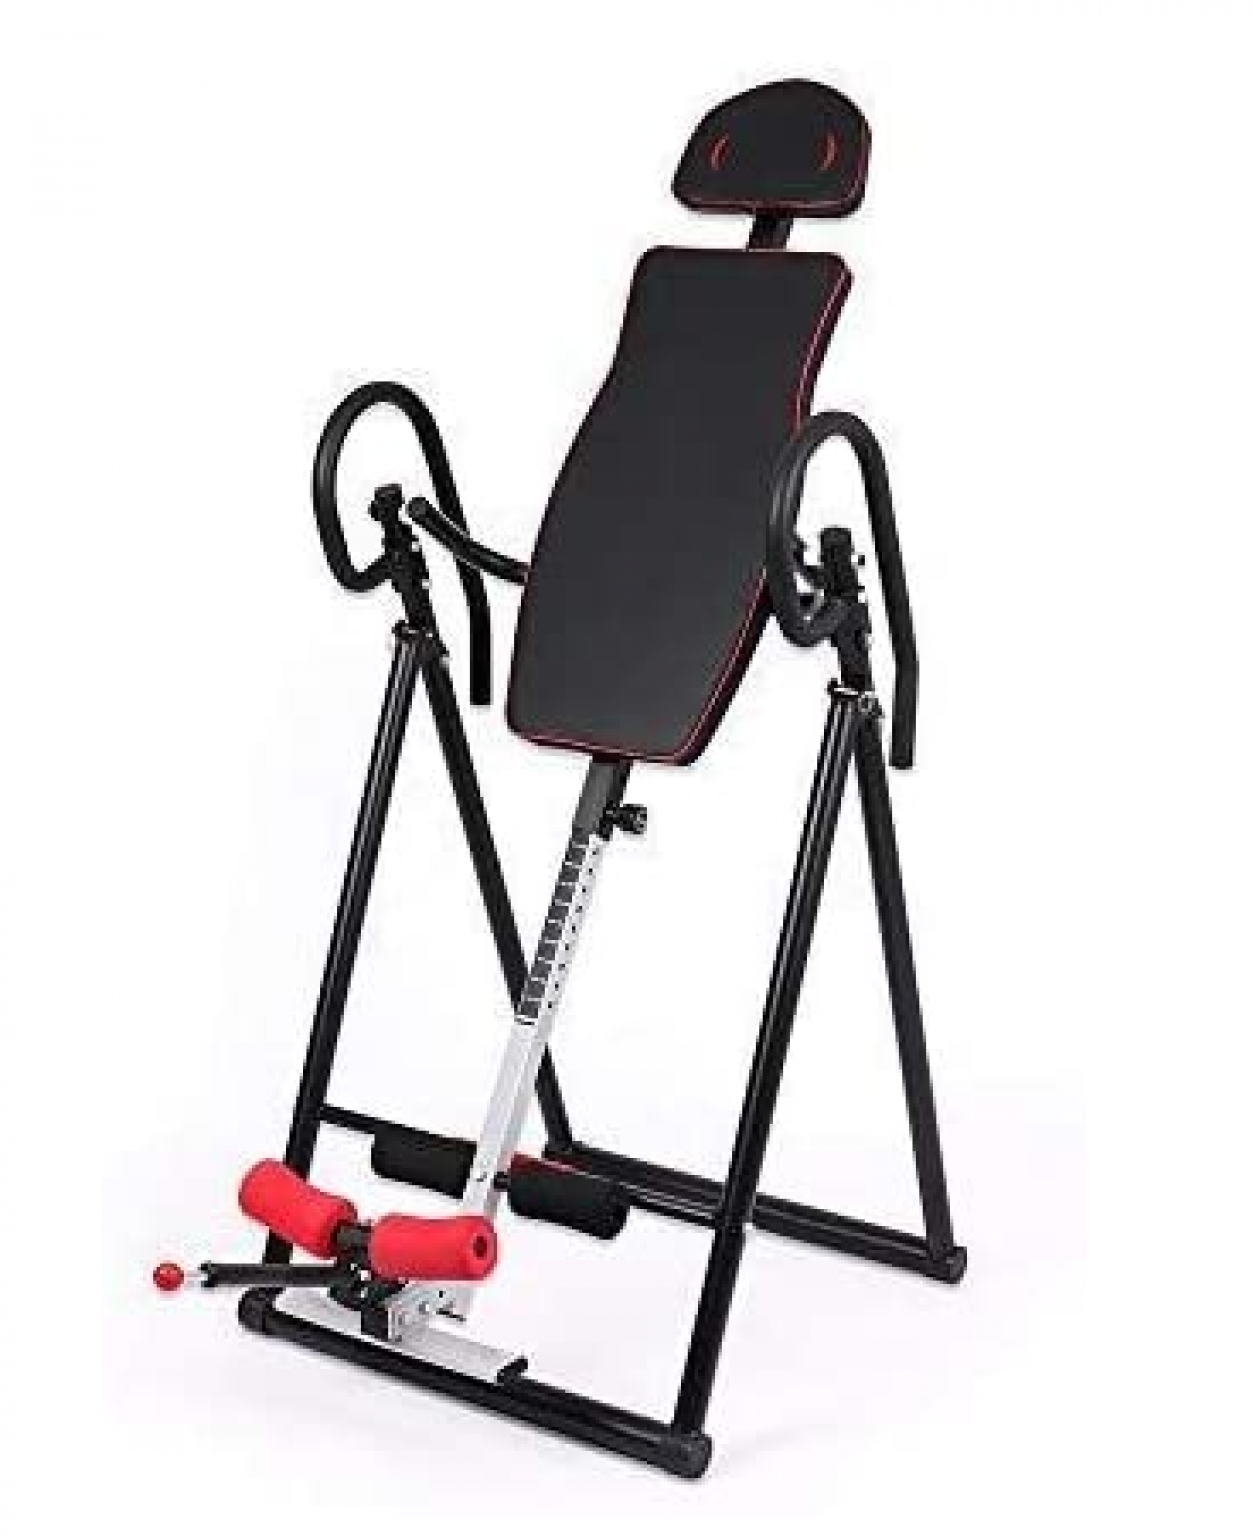 Beauty4Less Inversion Table Exercise Bench.